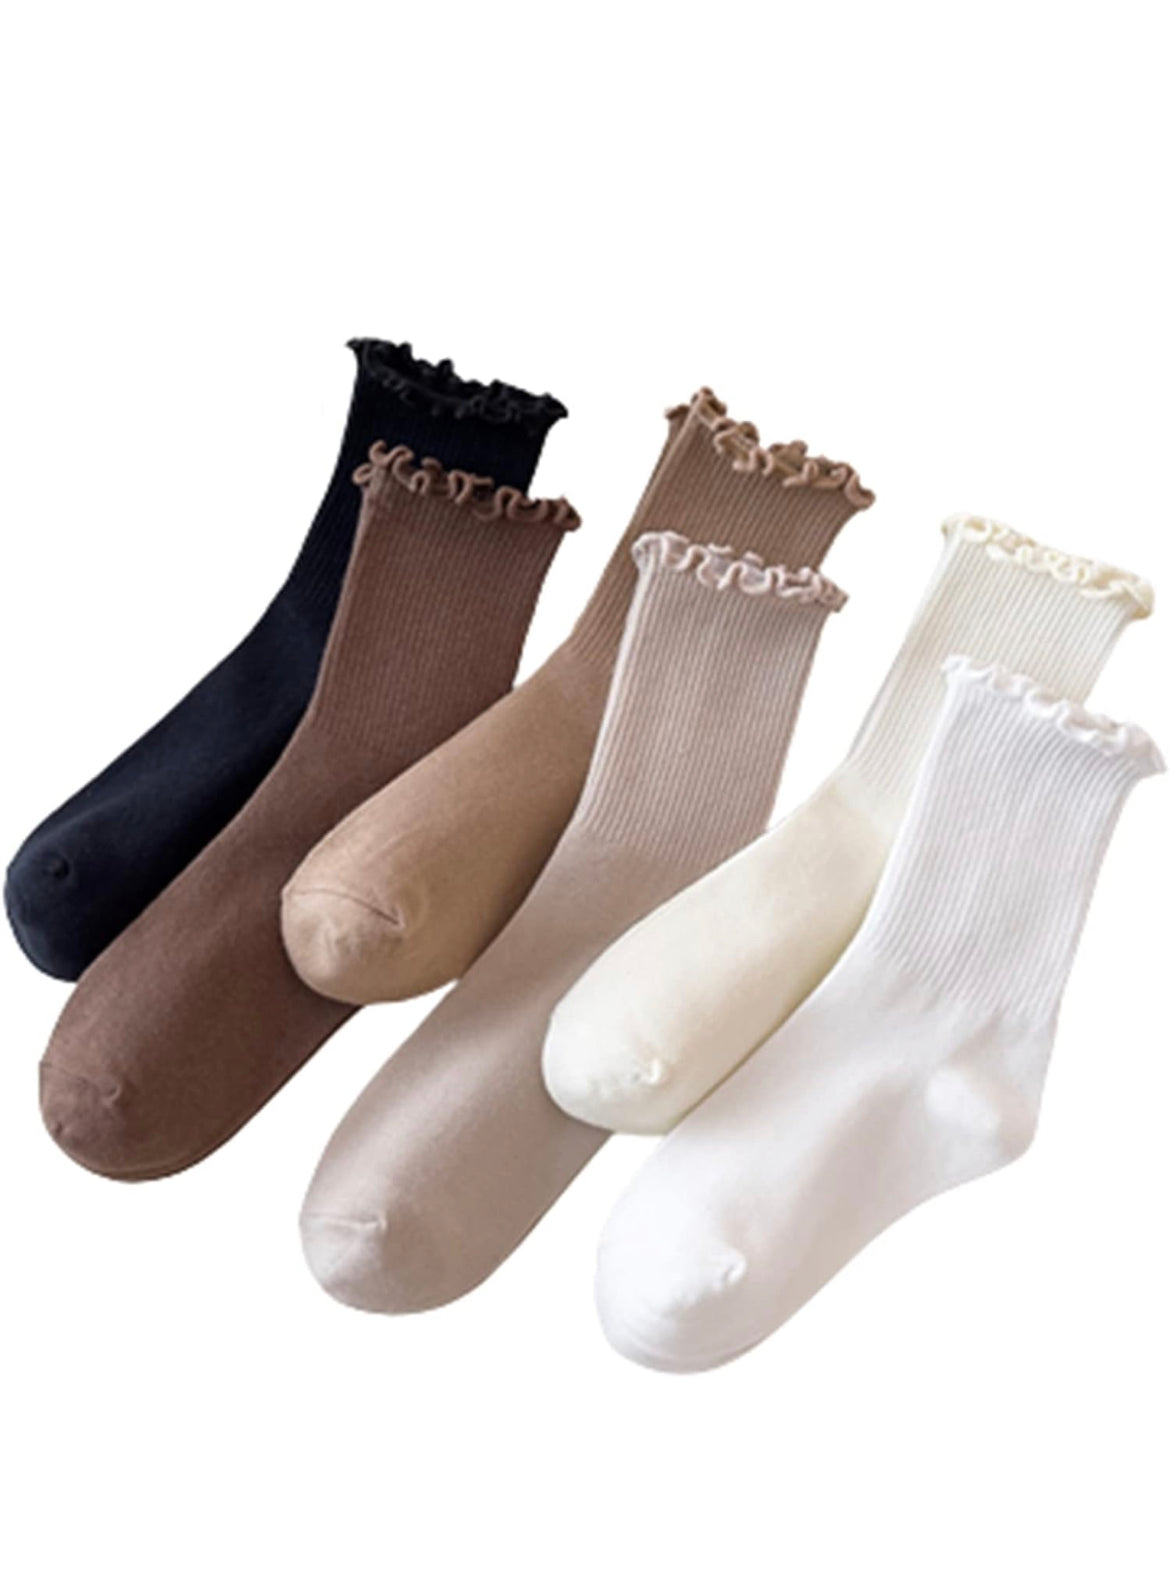 Peeping Over The Boots Socks (6 Colors)